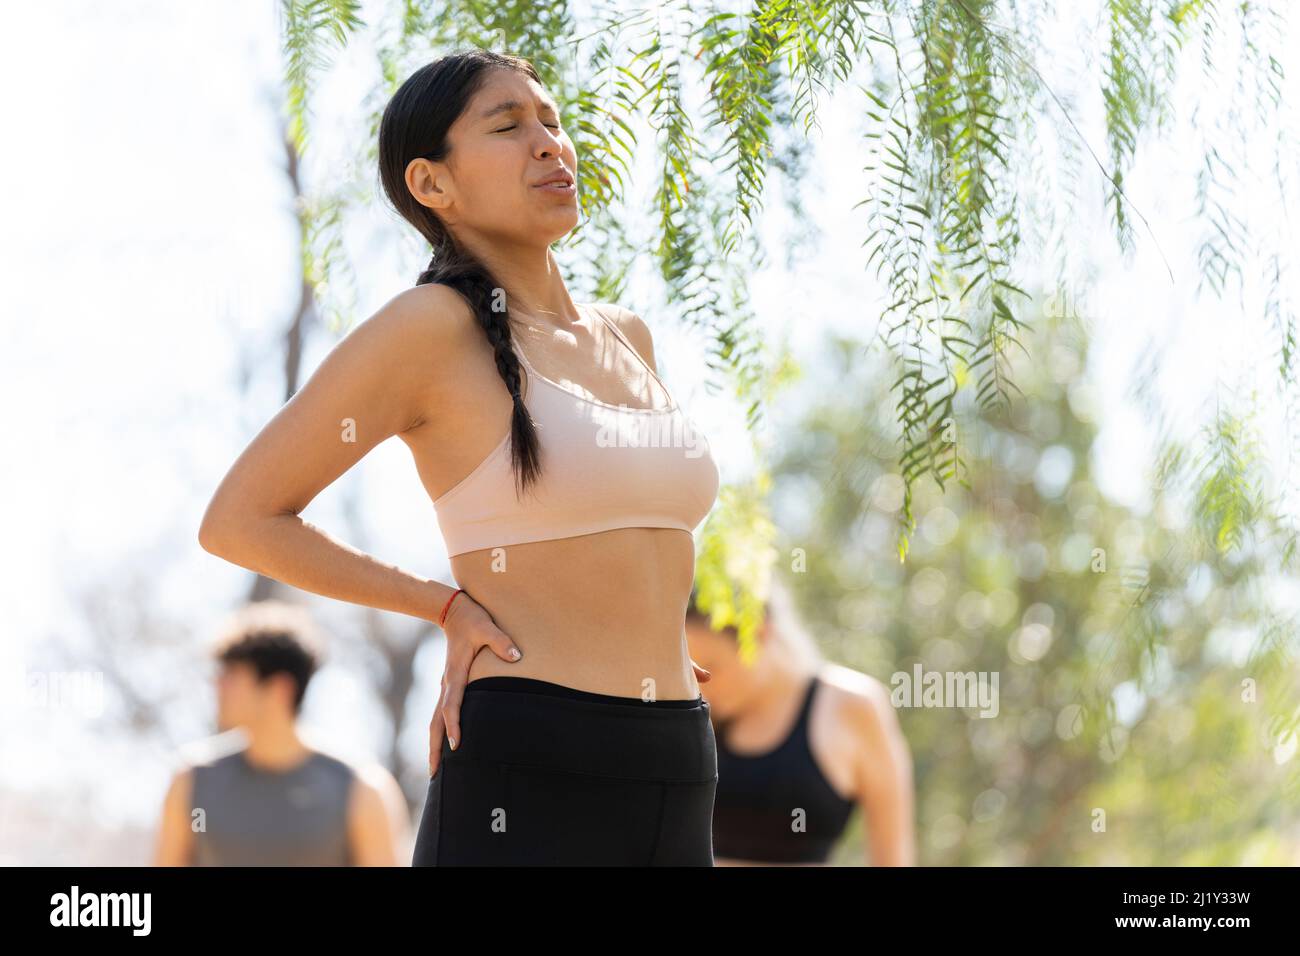 Hispanic young woman expresses back pain while doing sports Stock Photo